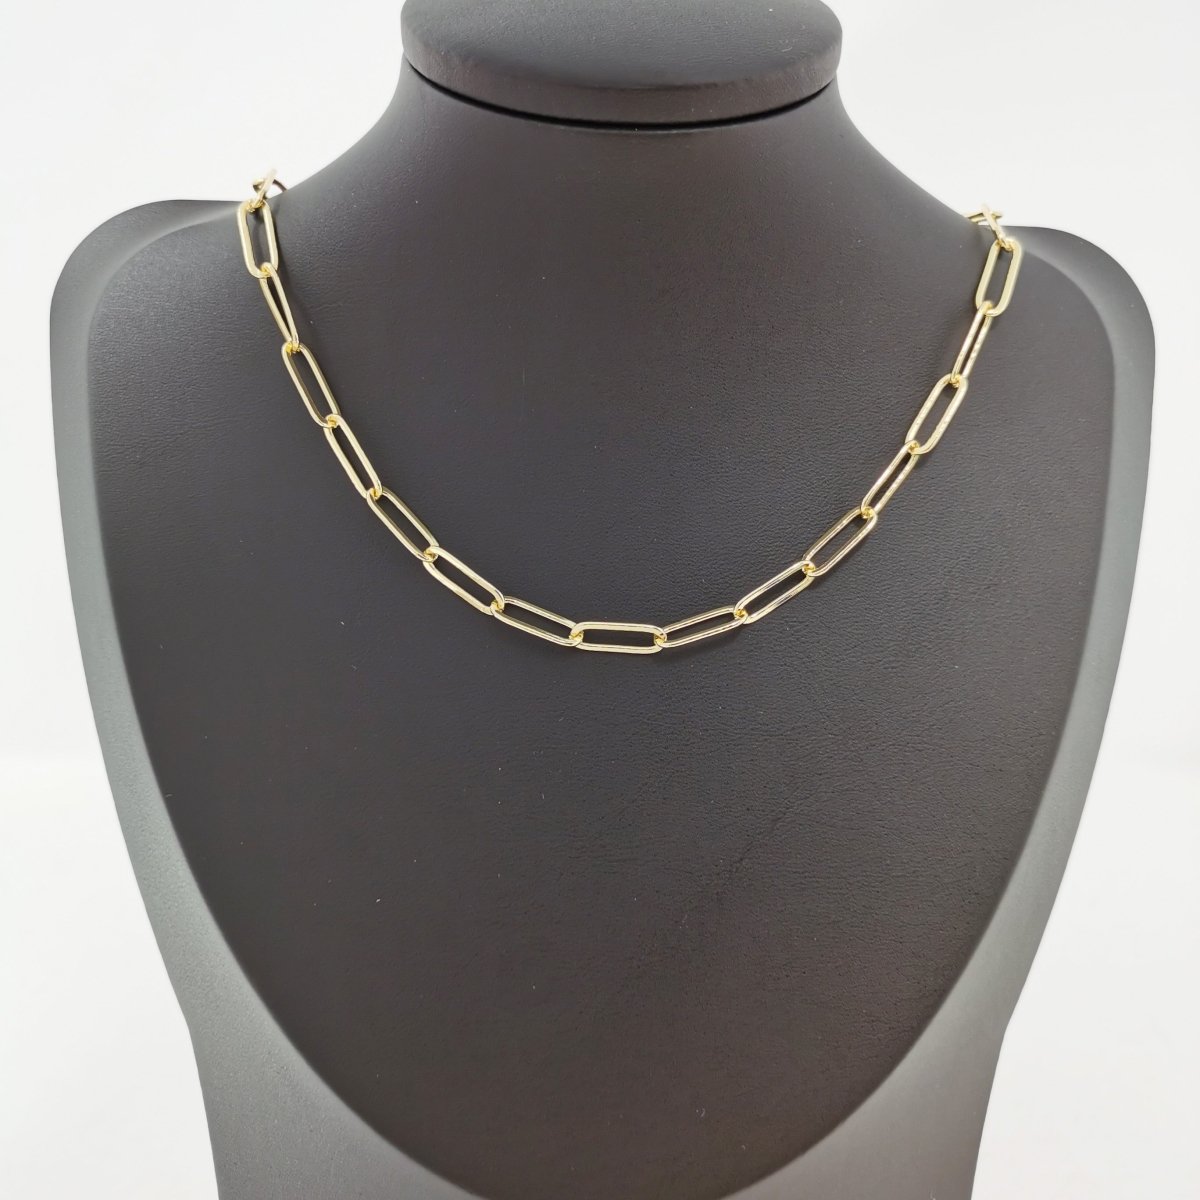 Medium Paperclip Rectangle Cable Chains By Yard in 14K Gold Filled Chain Choker, Bracelet, Necklace Chain supplies | ROLL-206 - DLUXCA